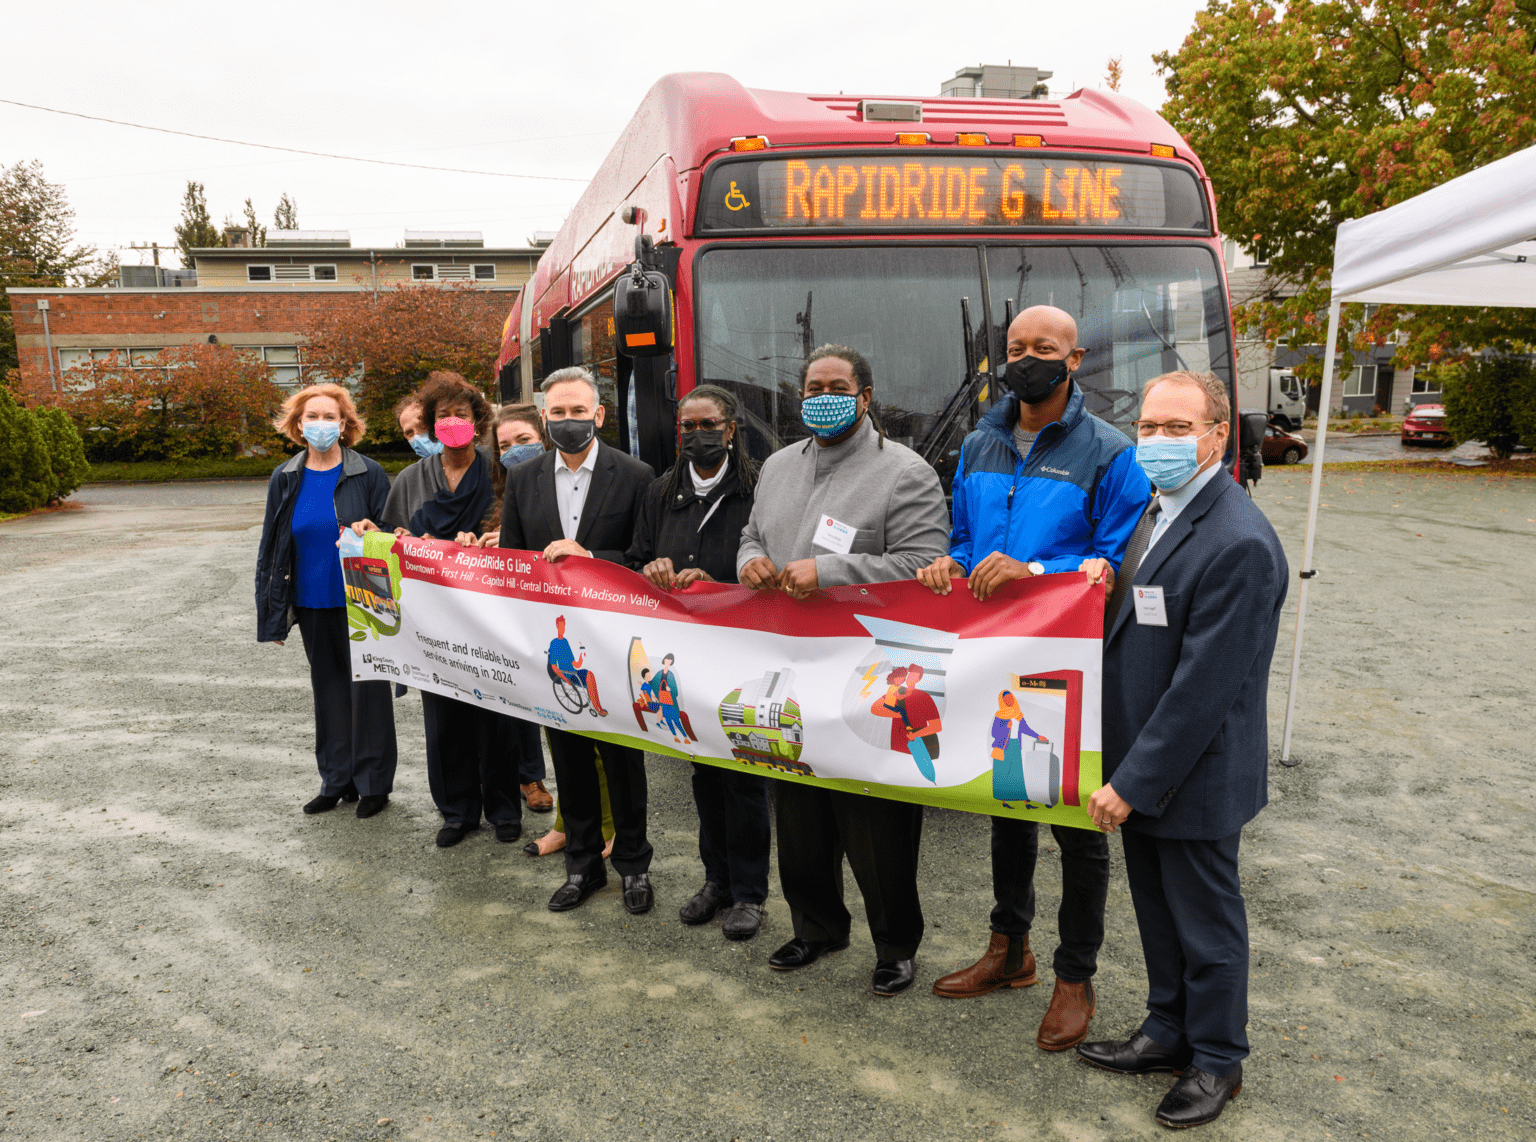 Public transportation leaders and elected officials stand side-by-side with community representatives to celebrate the start of construction on the Madison – RapidRide G Line project at a groundbreaking event in Seattle.